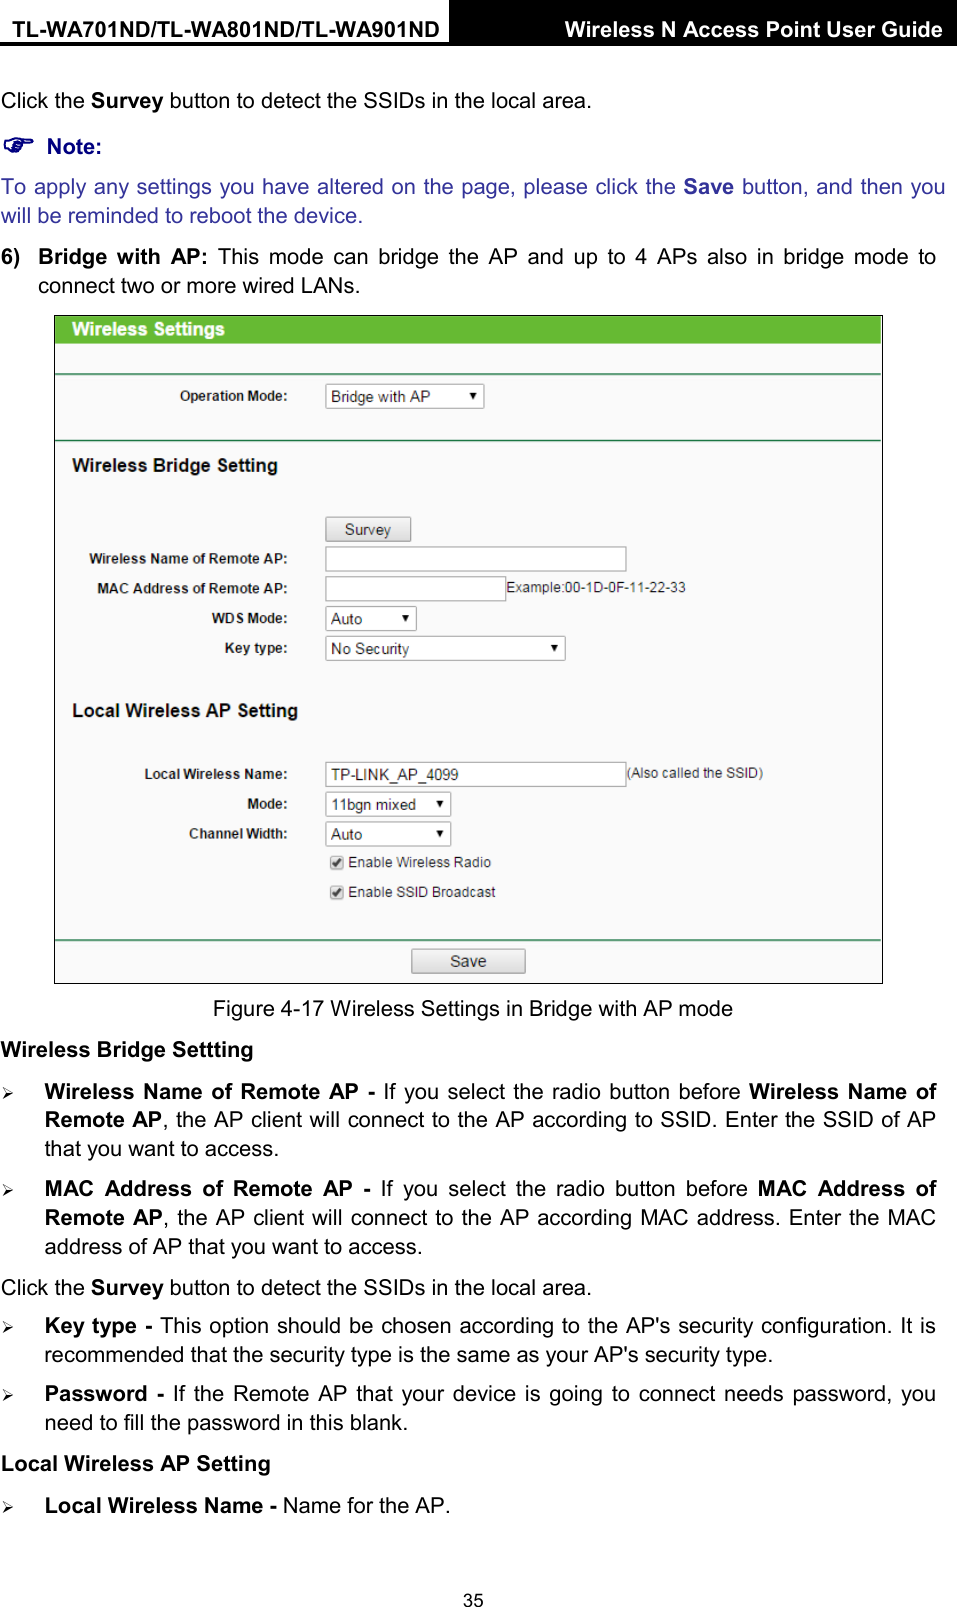 TL-WA701ND/TL-WA801ND/TL-WA901ND Wireless N Access Point User Guide  35 Click the Survey button to detect the SSIDs in the local area.  Note: To apply any settings you have altered on the page, please click the Save button, and then you will be reminded to reboot the device. 6) Bridge with AP:  This mode  can  bridge the AP and up to 4 APs also in bridge mode to connect two or more wired LANs.    Figure 4-17 Wireless Settings in Bridge with AP mode Wireless Bridge Settting  Wireless Name of Remote AP - If you select the radio button before Wireless Name of Remote AP, the AP client will connect to the AP according to SSID. Enter the SSID of AP that you want to access.  MAC  Address  of  Remote AP  -  If you select the radio button before MAC  Address  of Remote AP, the AP client will connect to the AP according MAC address. Enter the MAC address of AP that you want to access. Click the Survey button to detect the SSIDs in the local area.  Key type - This option should be chosen according to the AP&apos;s security configuration. It is recommended that the security type is the same as your AP&apos;s security type.  Password  -  If the Remote AP  that  your device is going to connect needs password, you need to fill the password in this blank. Local Wireless AP Setting  Local Wireless Name - Name for the AP. 